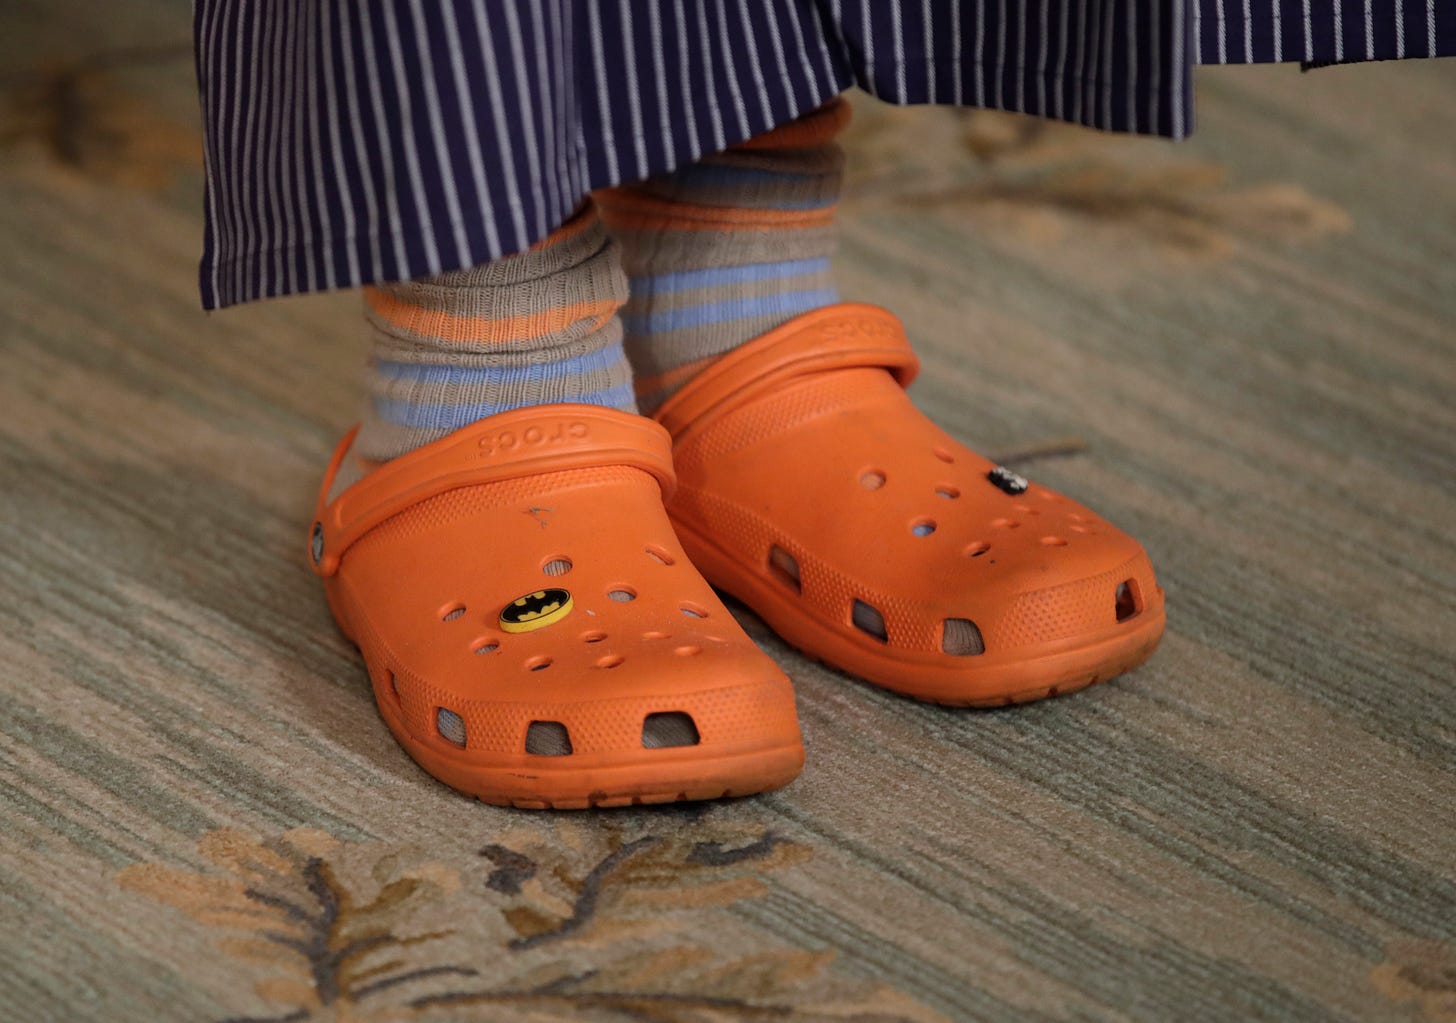 Wait, when did Crocs become cool again?